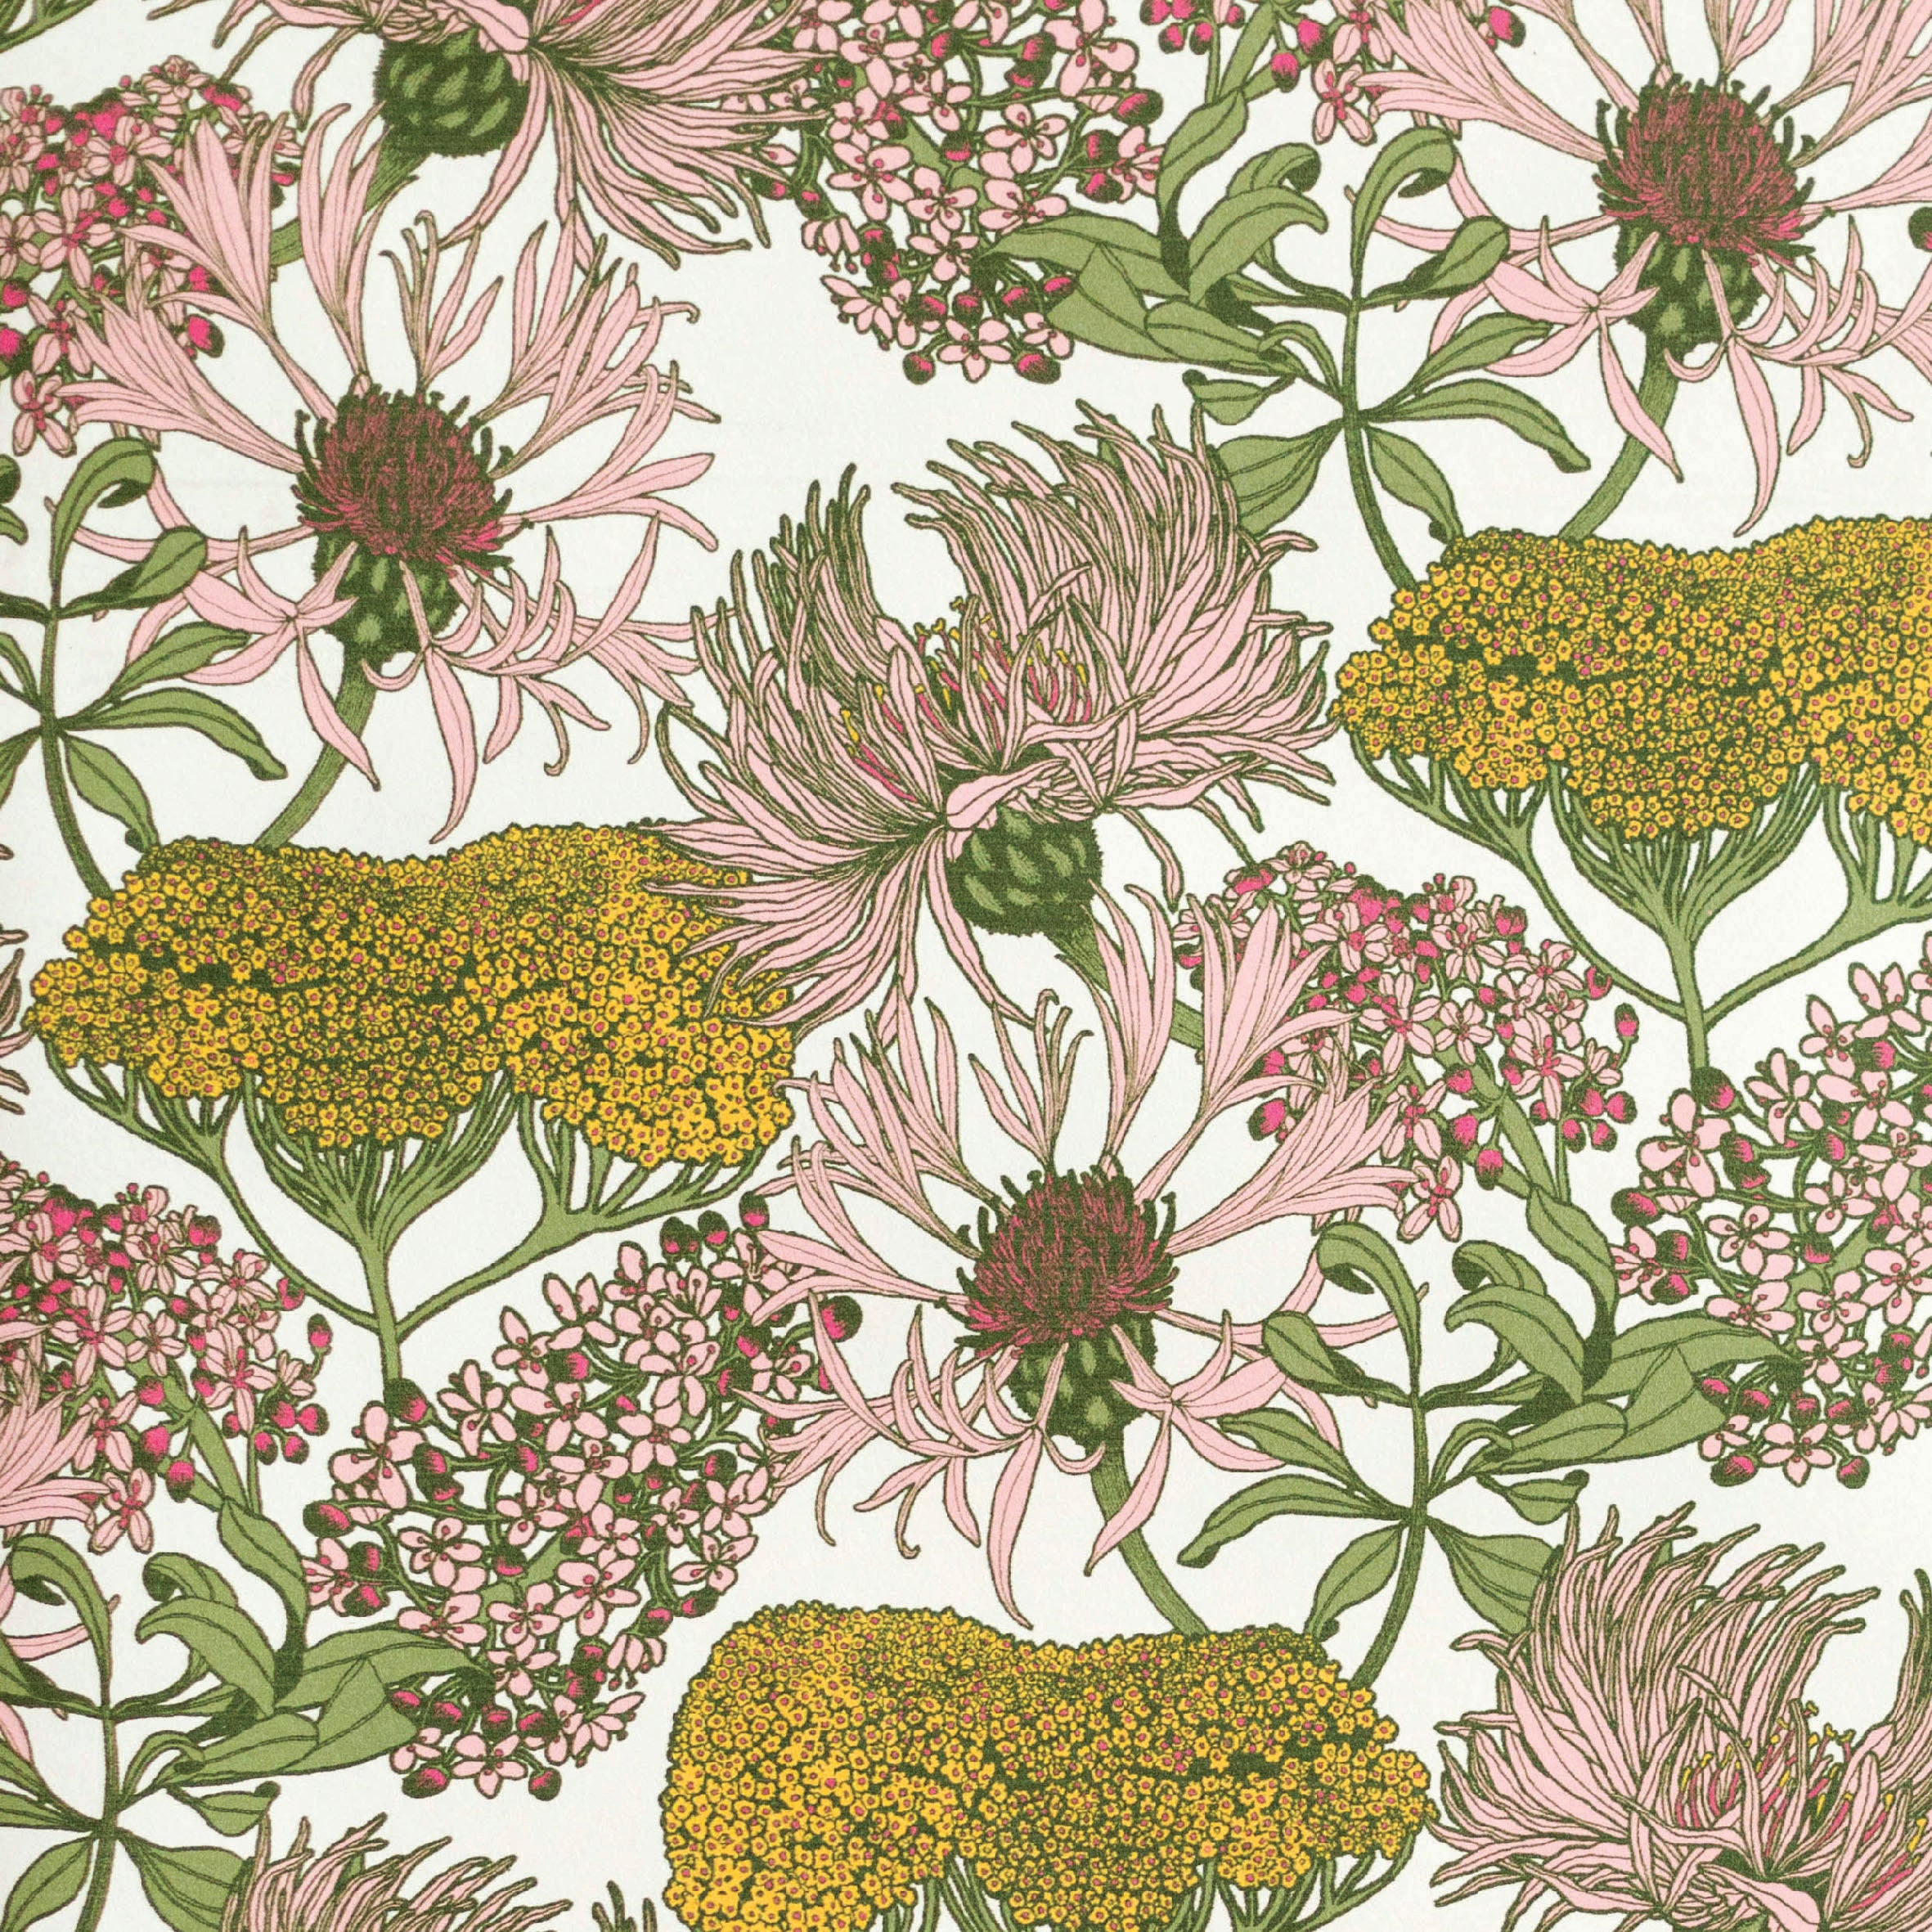 Detail  of a wild flower print in shades of pink and yellow, with green leaves and accents of hot pink.